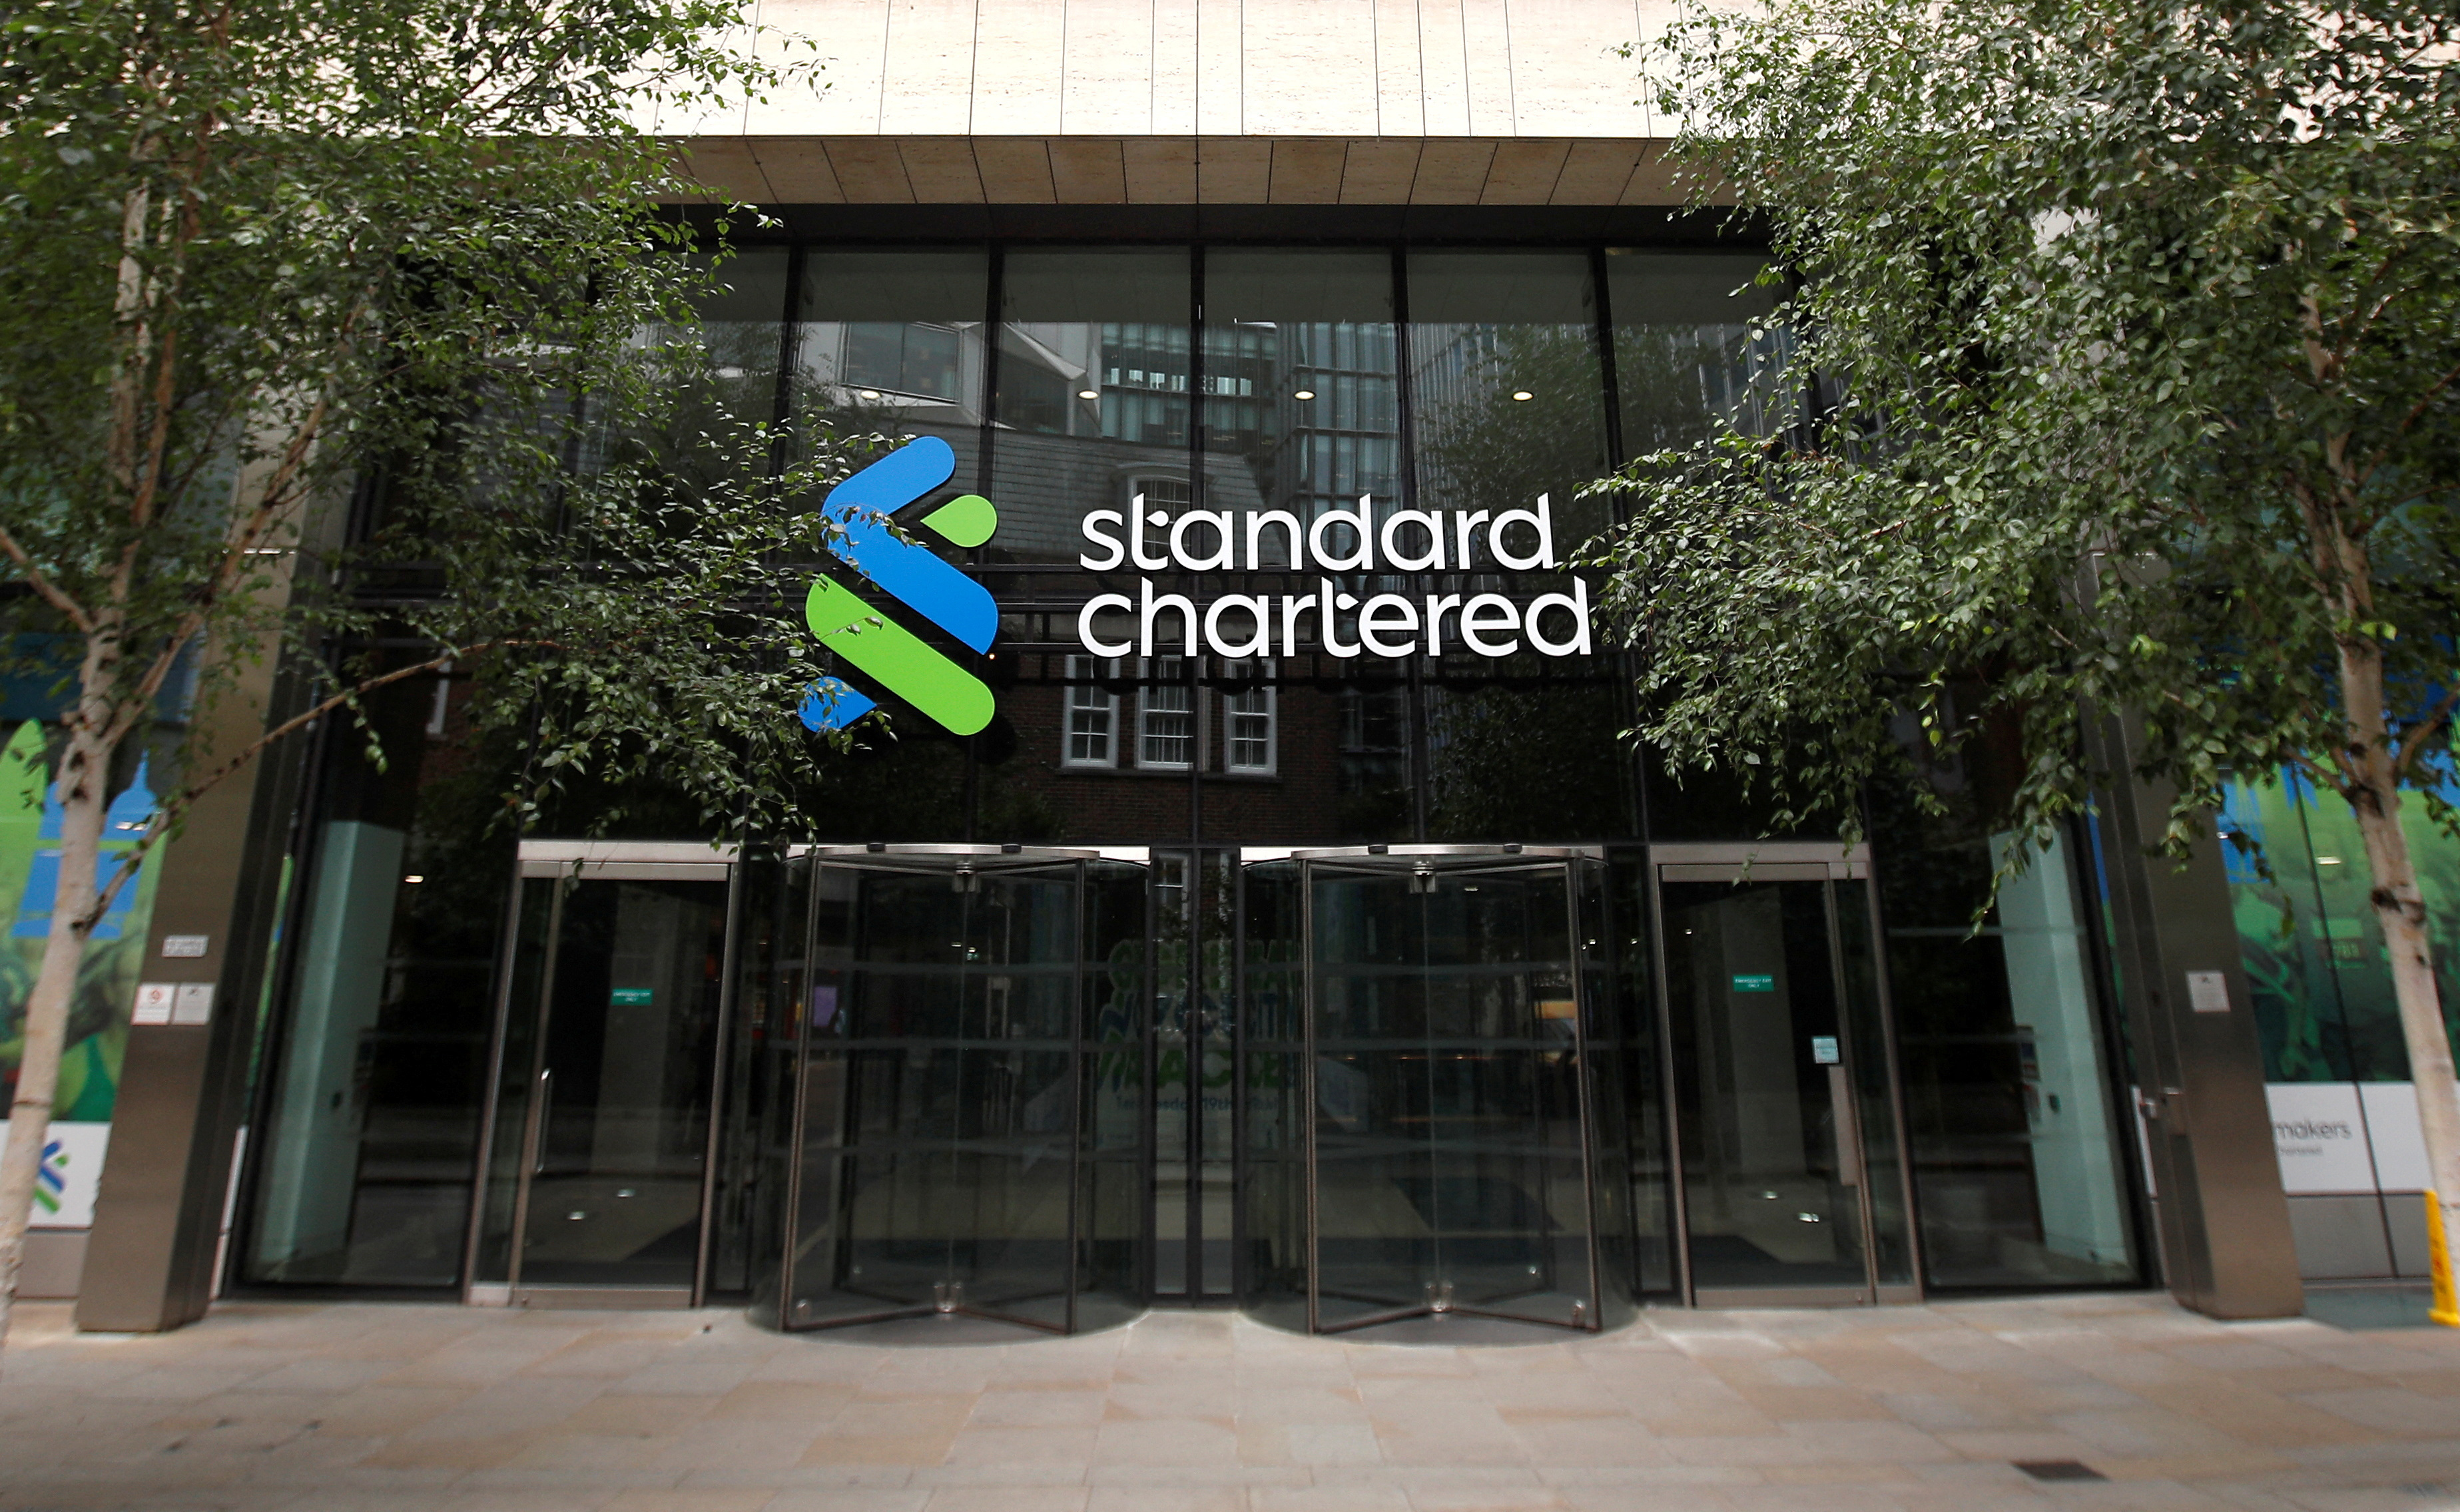 The Standard Chartered logo is seen at the bank's headquarters in London